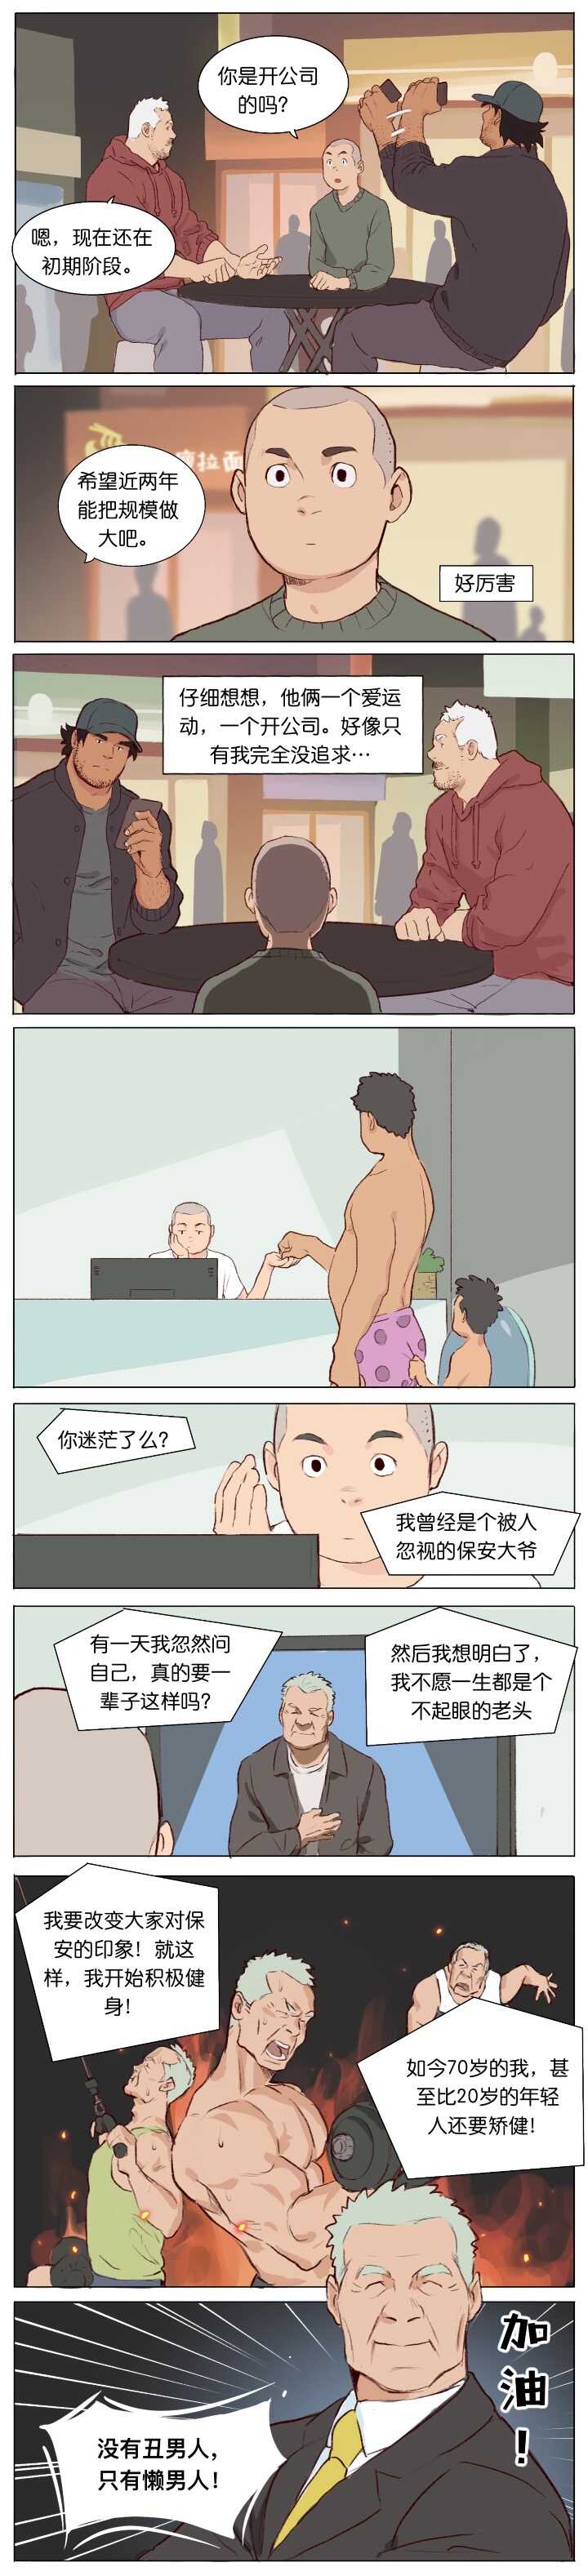 Artist_Youtian_Collection - Page 21